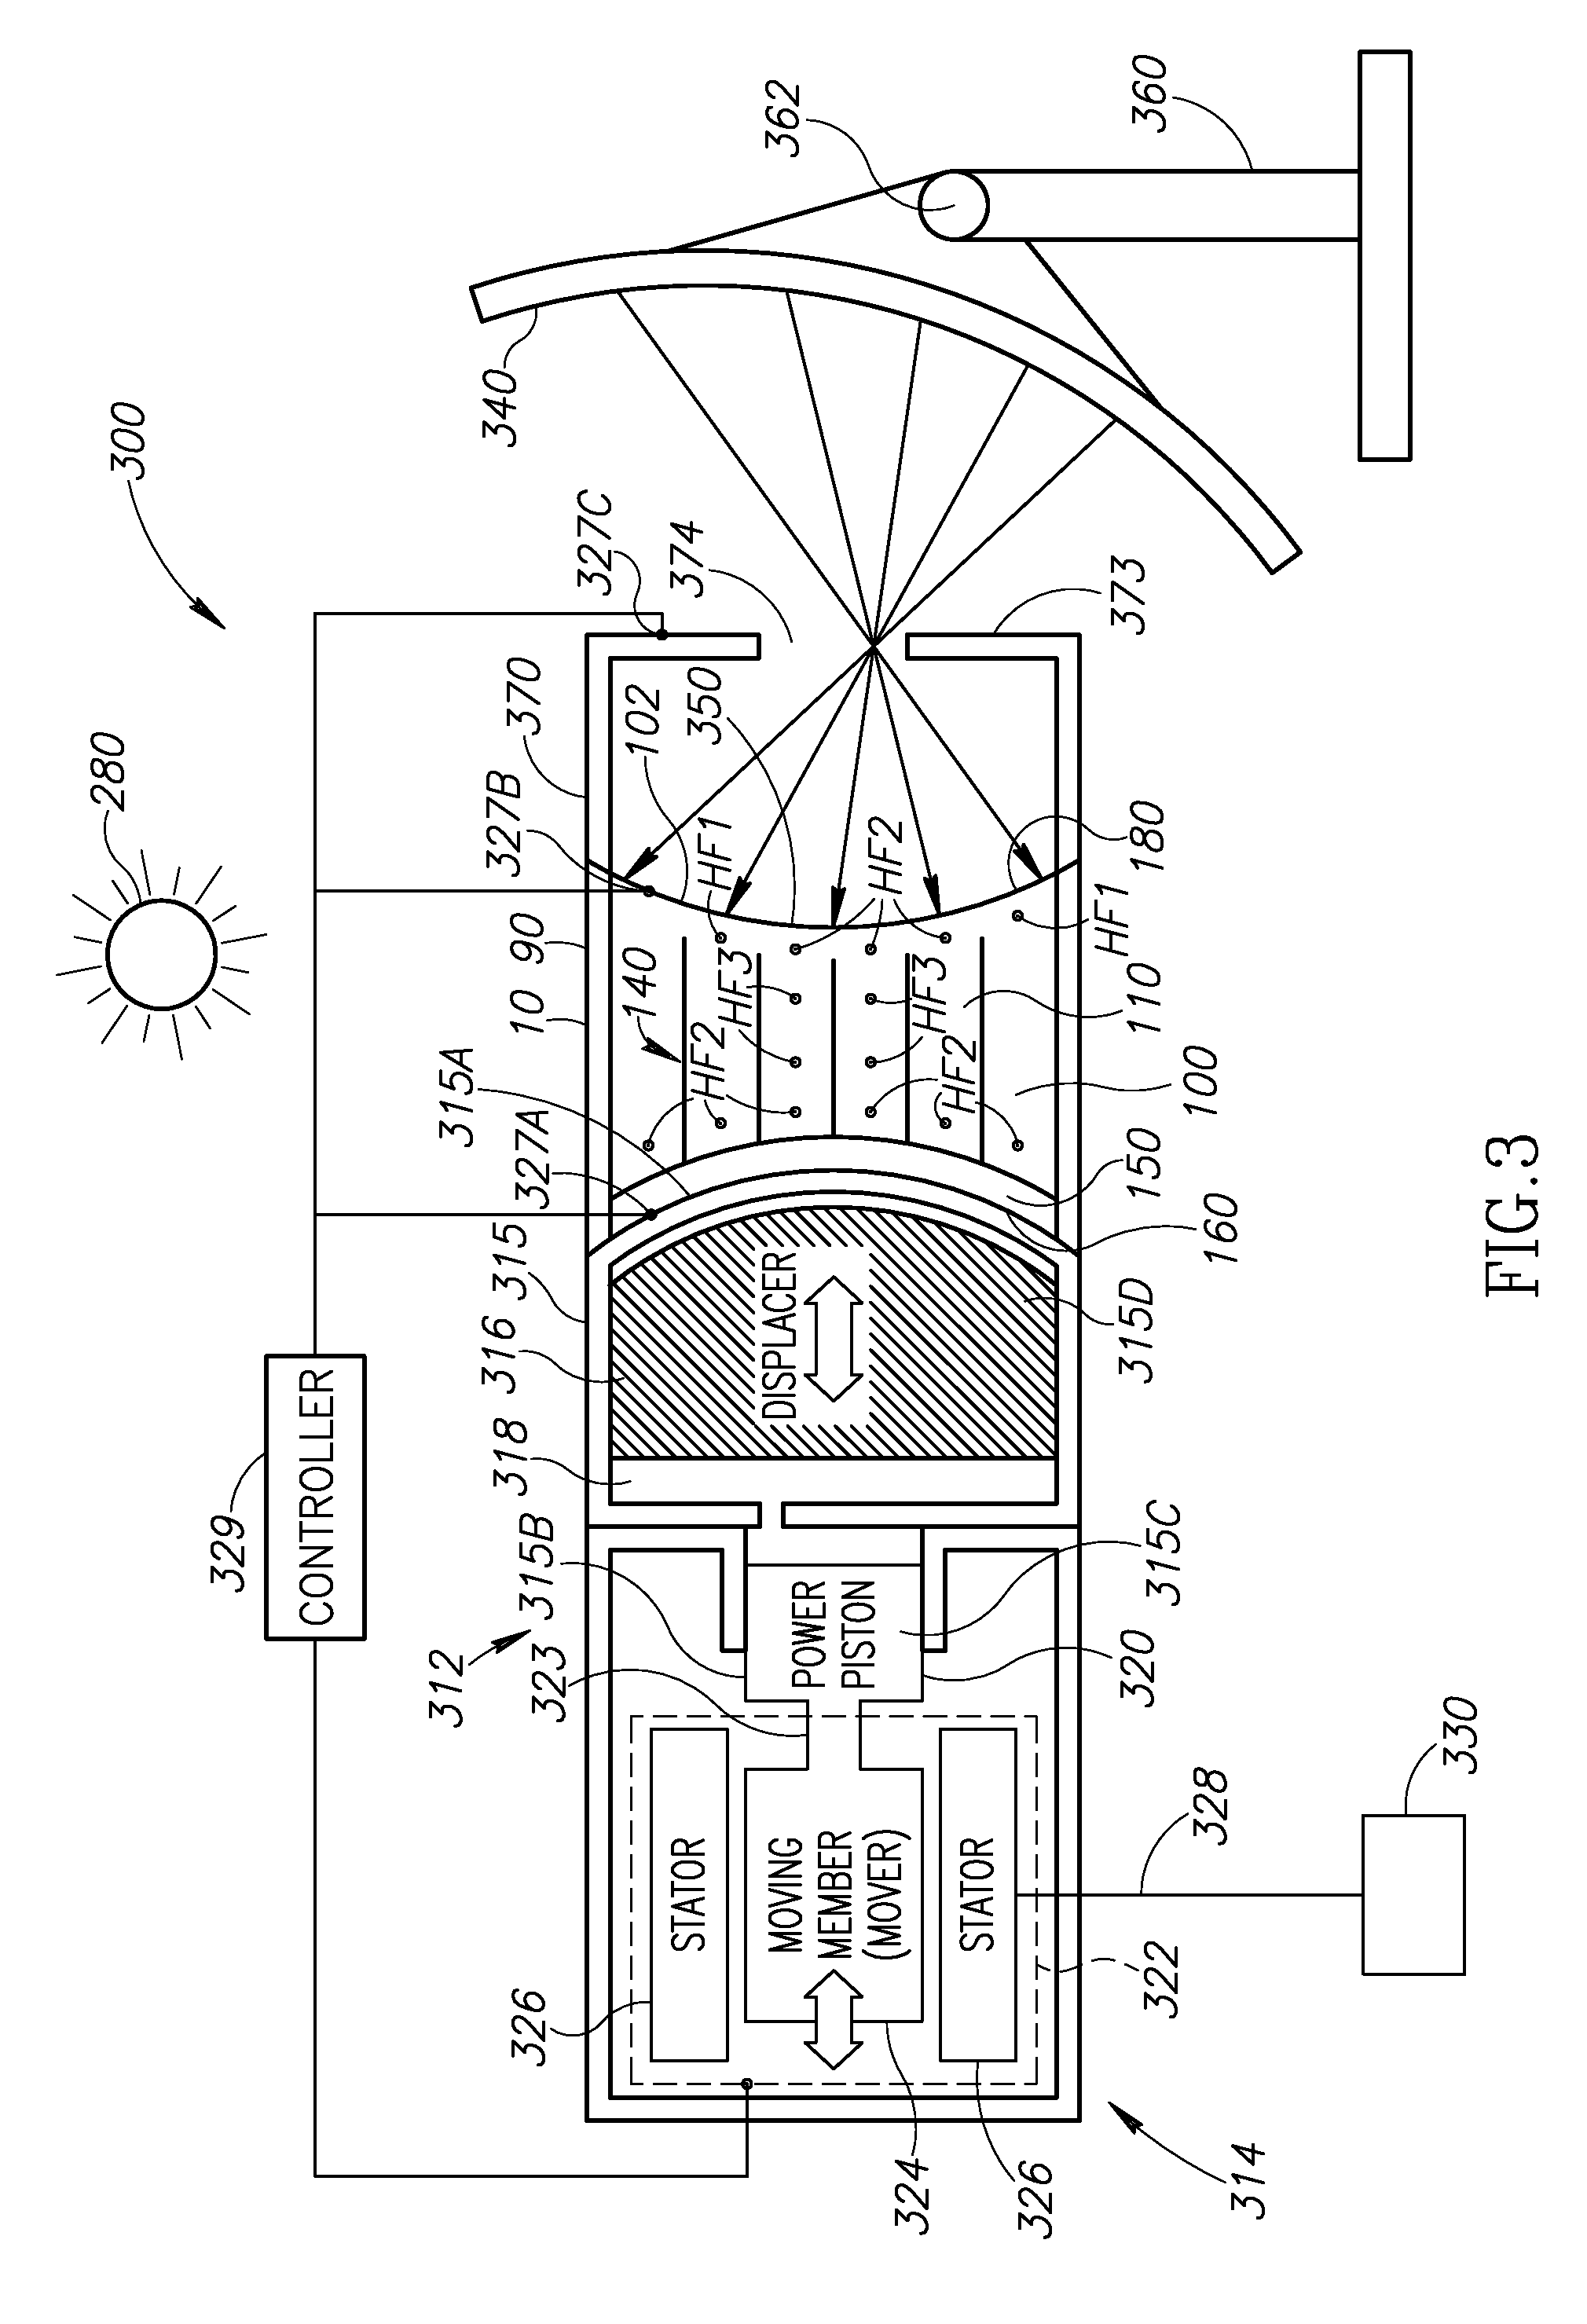 Thermal energy storage device